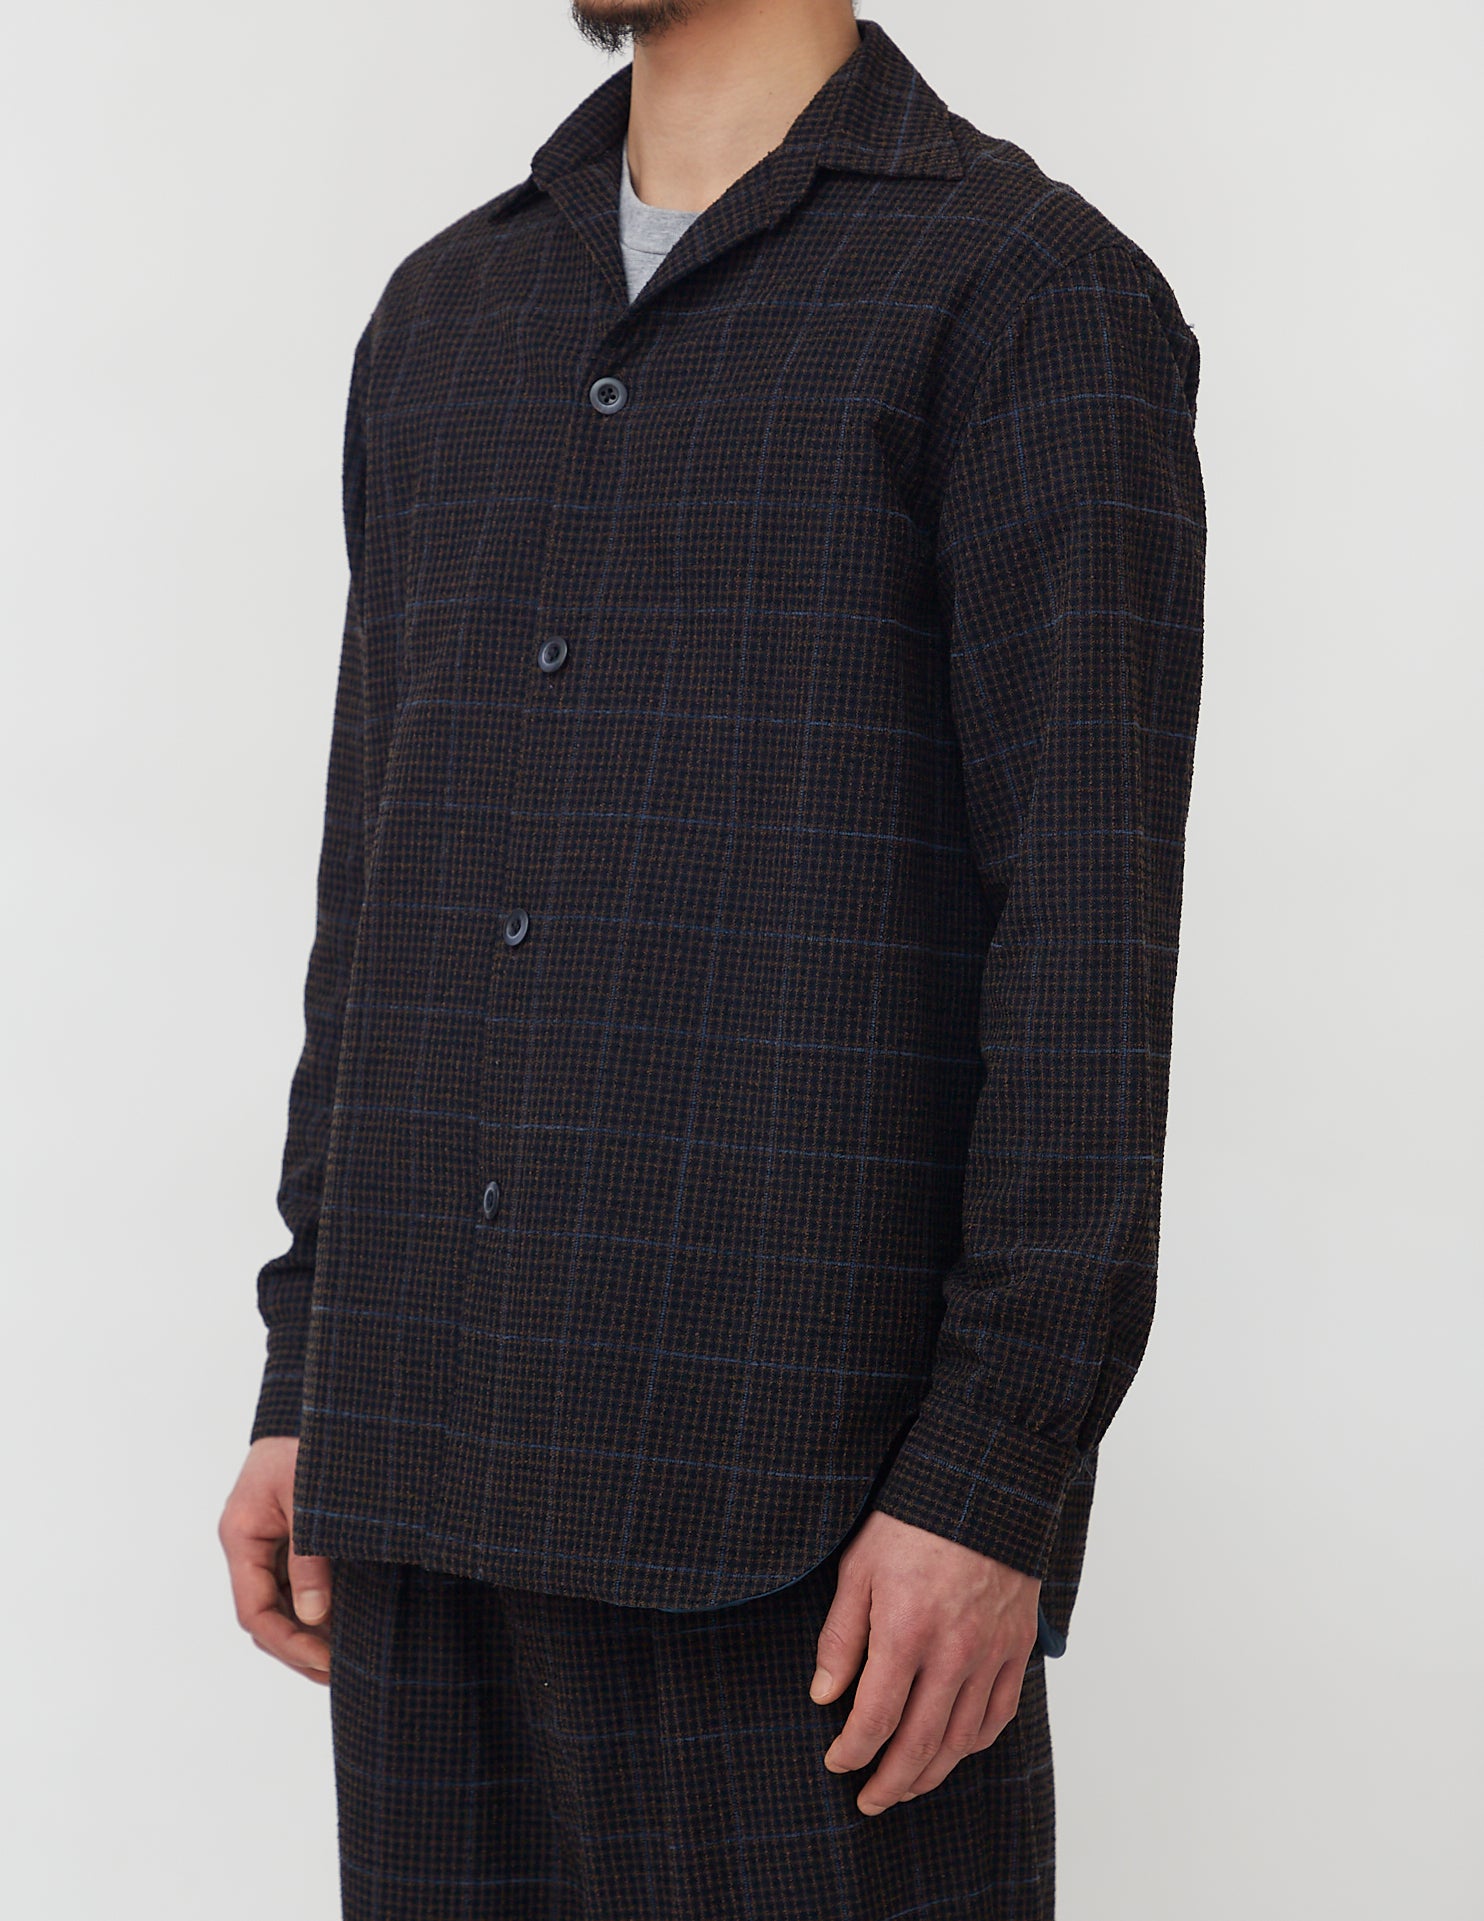 No Side Seam Fully-Lined Shirt navy x brown plaid